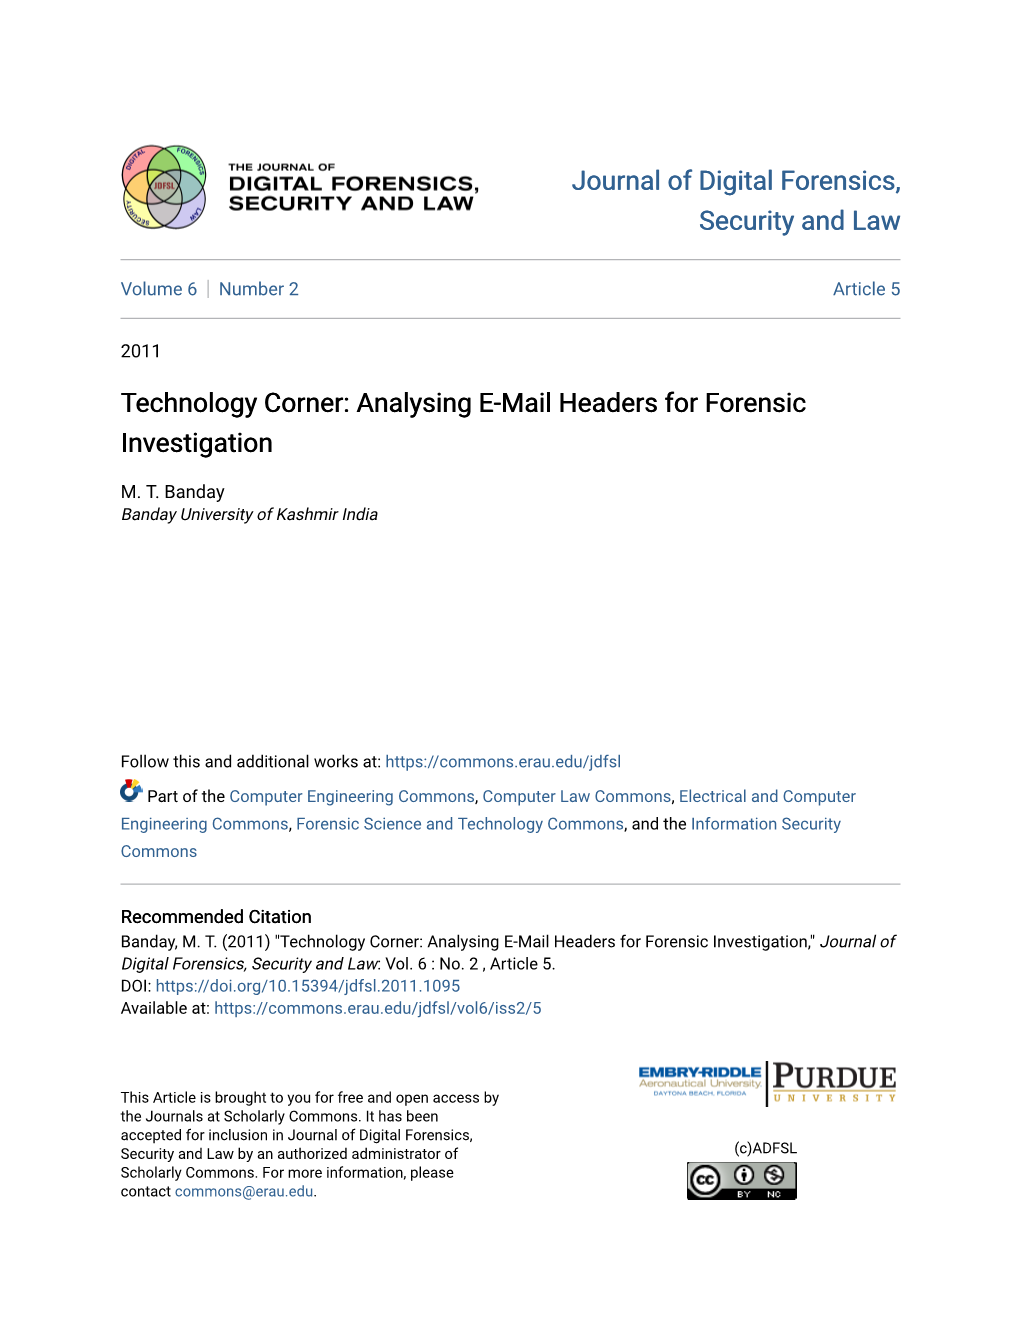 Analysing E-Mail Headers for Forensic Investigation